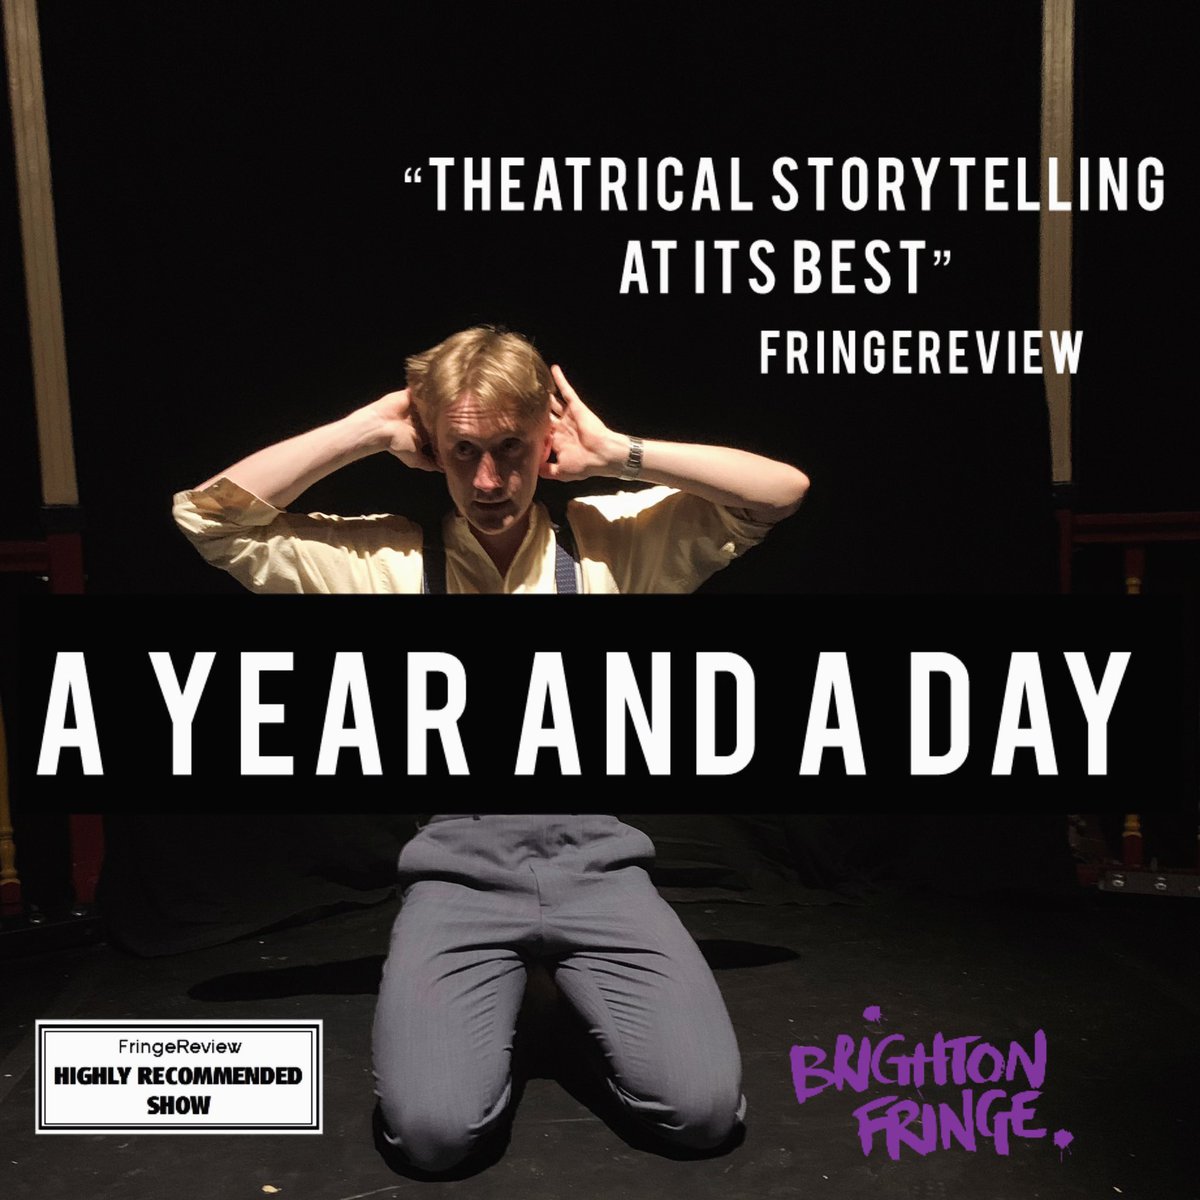 Only two more nights left to catch A Year and a Day @brightonfringe 

8th-12th May
18.15pm
@RotundaDome 
brightonfringe.org/events/a-year-…

#brightonfringe #fringetheatre #fringe #brighton #soloshow